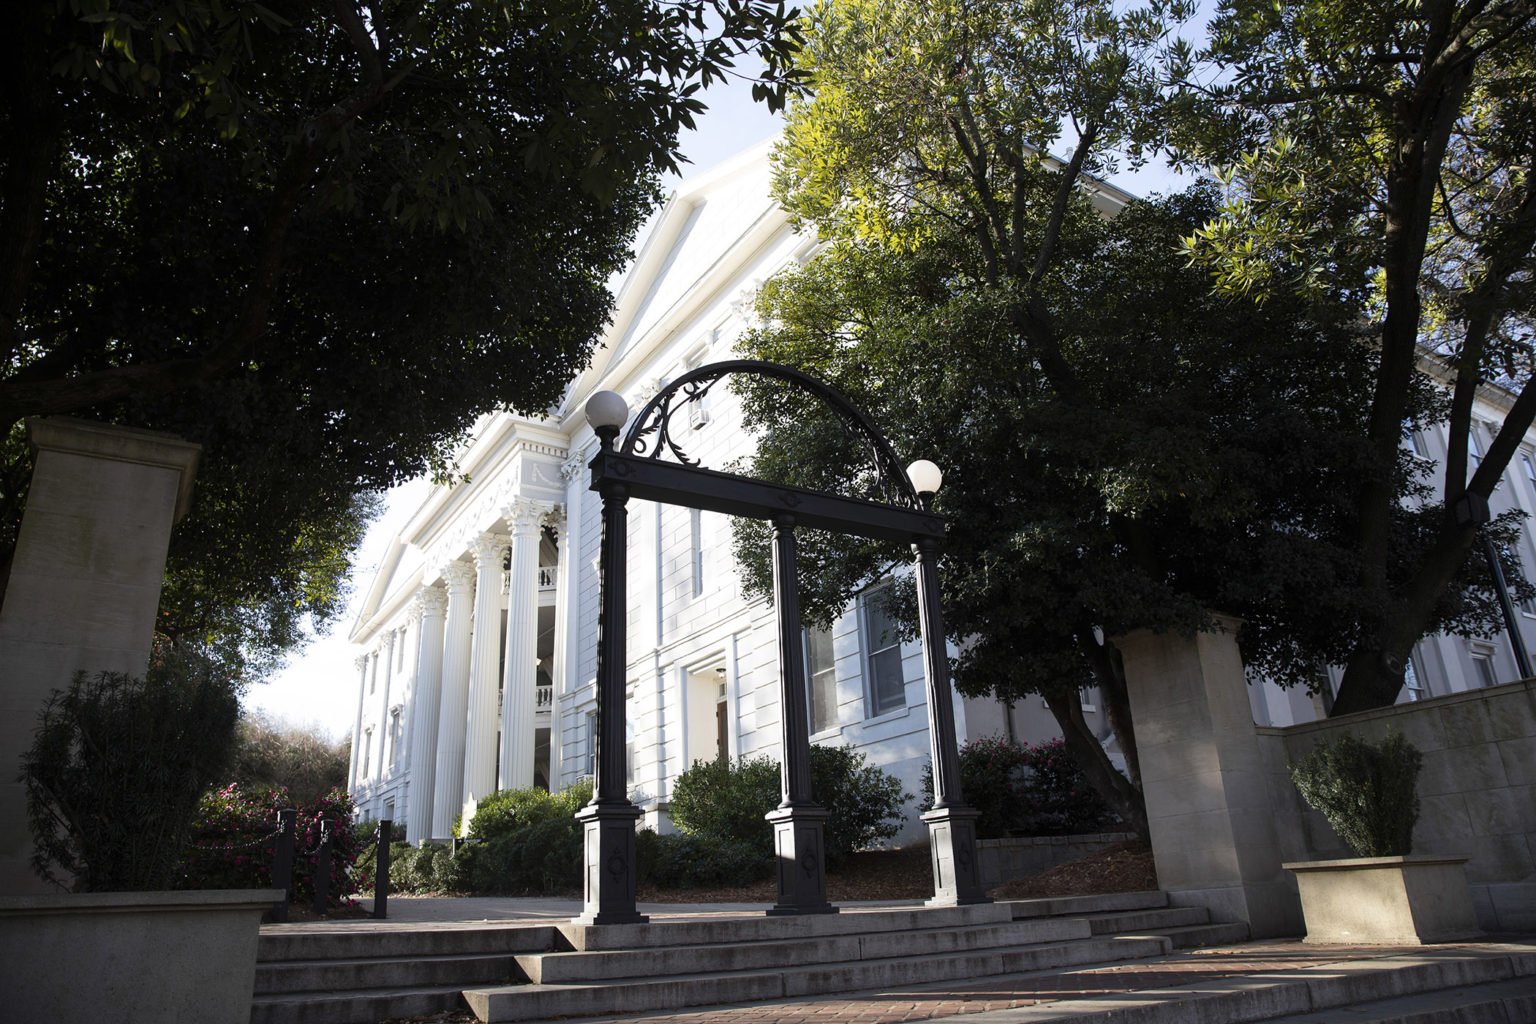 The University of Georgia generated a record $7.6 billion for the state’s economy in 2022 through its teaching, research and public service, according to a new study. Growth in the number of degrees conferred at the undergraduate and graduate levels, increases in externally funded research activity, and an expansion of public service and outreach activities all contributed to the $200 million increase in UGA’s economic impact on the state.